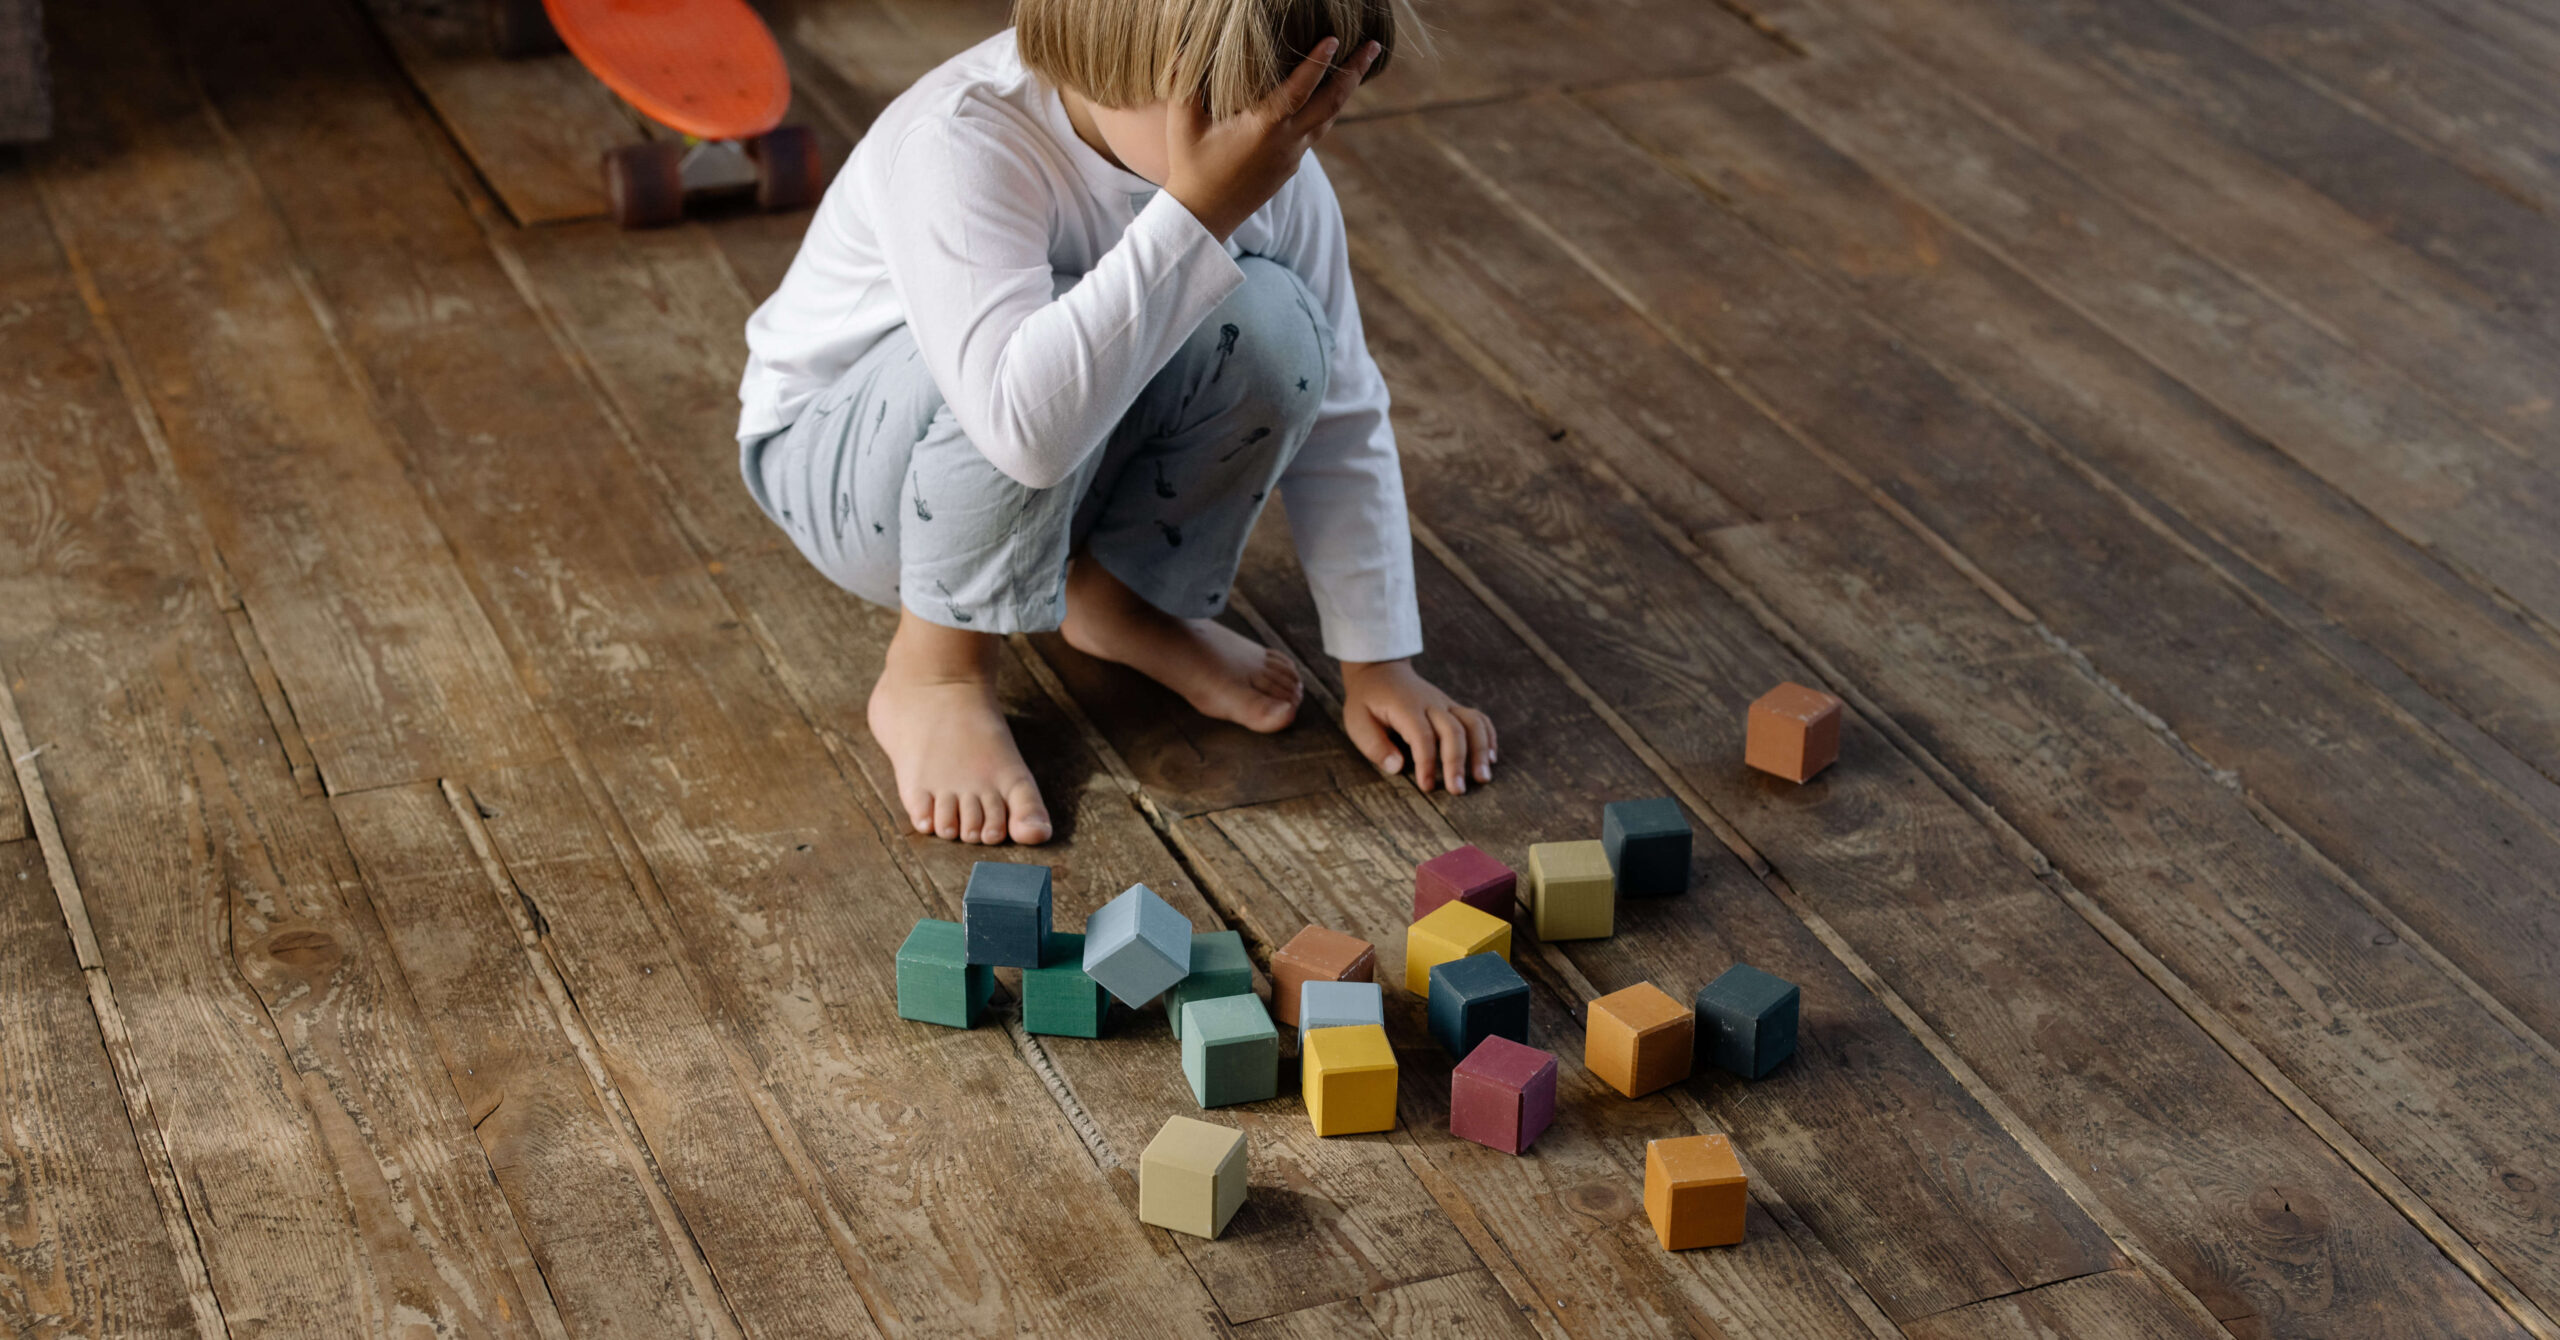 a child looking upset, squatting on the floor with blocks